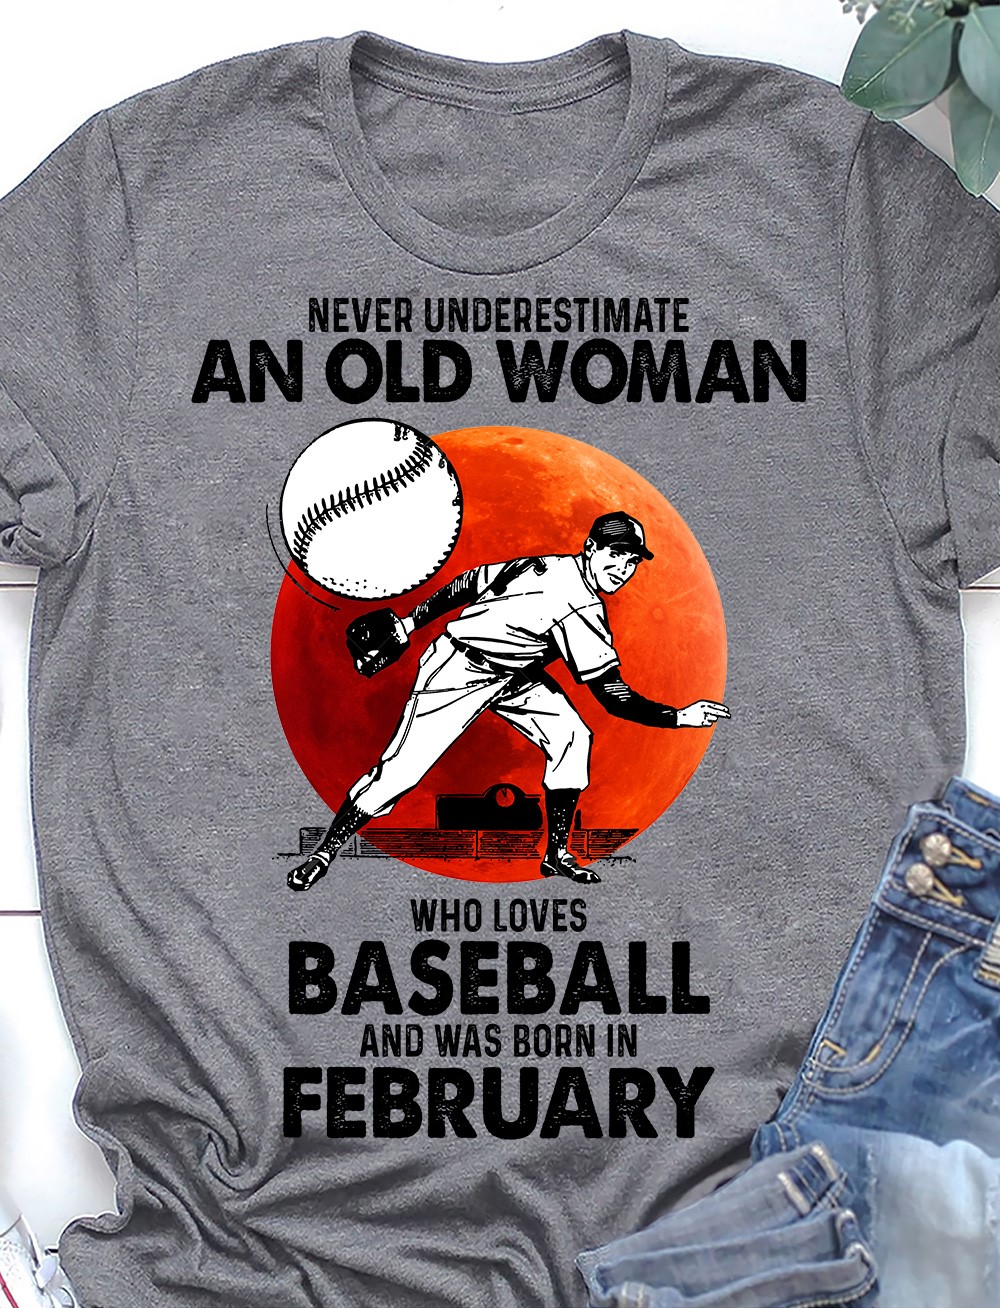 Never underestimate an old woman who loves baseball and was born in February